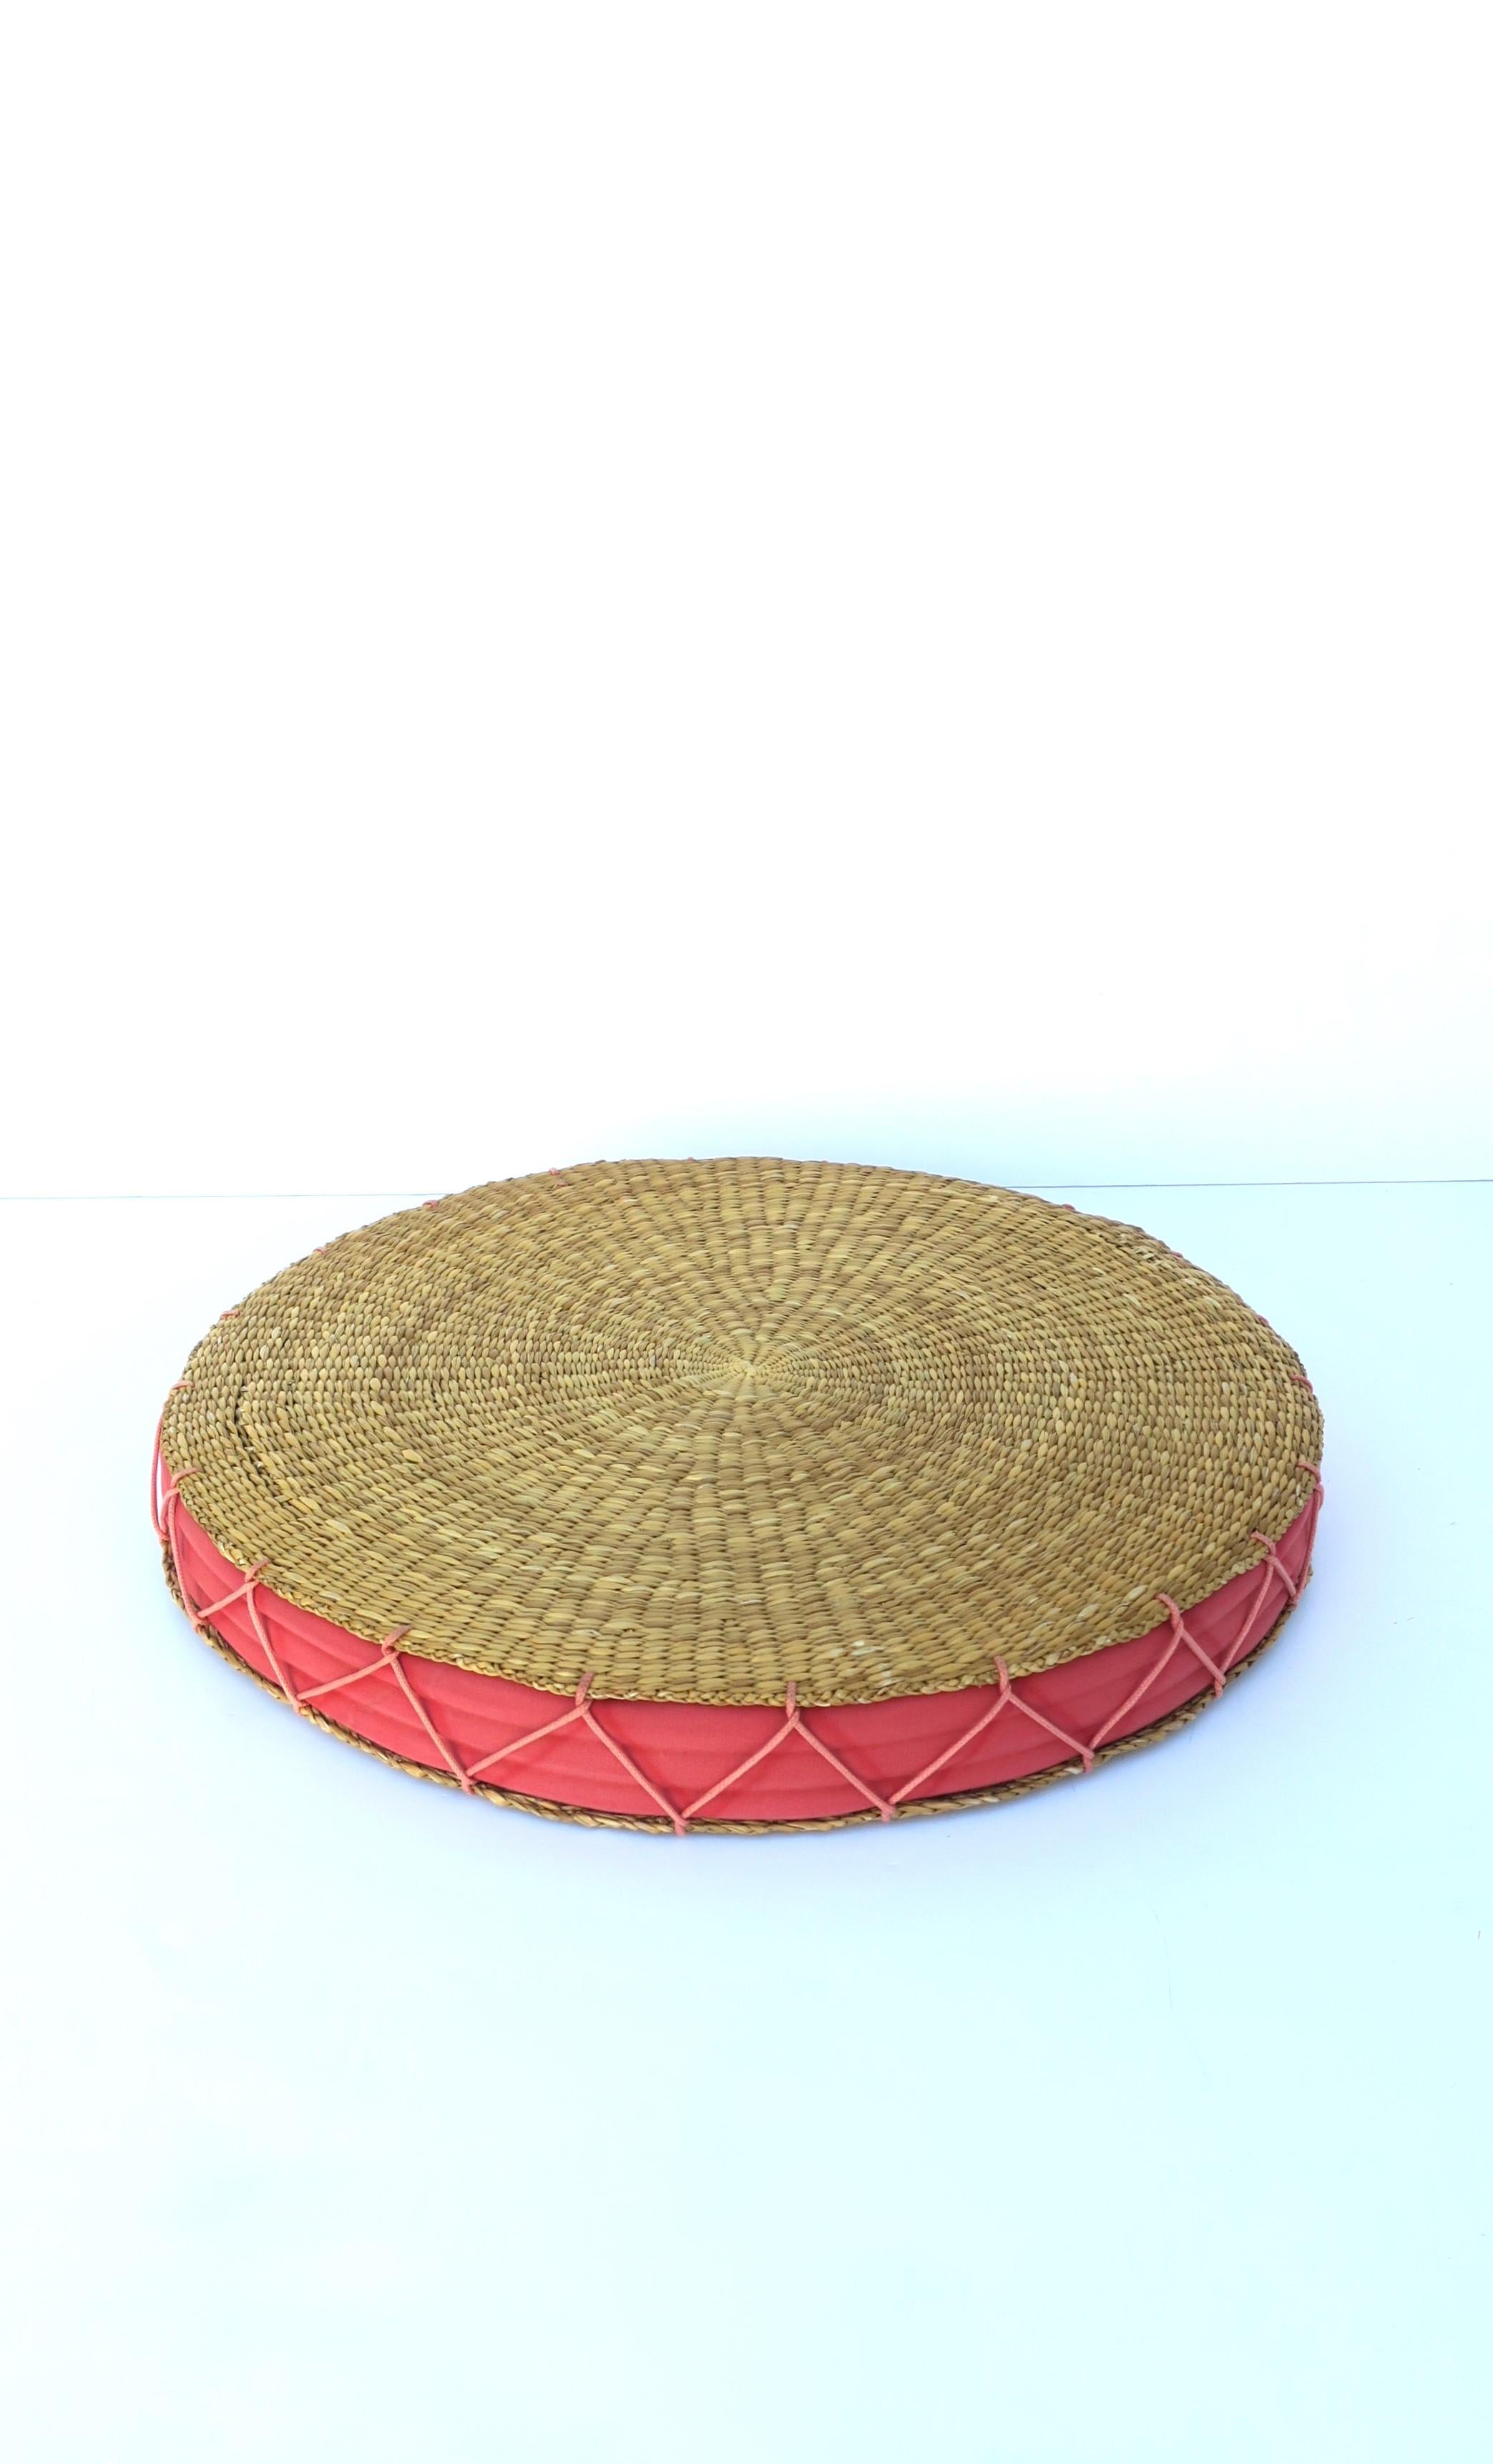 A vintage wicker and watermelon pink seat or floor cushion with cotton insert and large 'X' stitching around, circa mid to late-20th century. Piece could also be used as a tray to hold light items as demonstrated with coral piece. 

Dimensions: